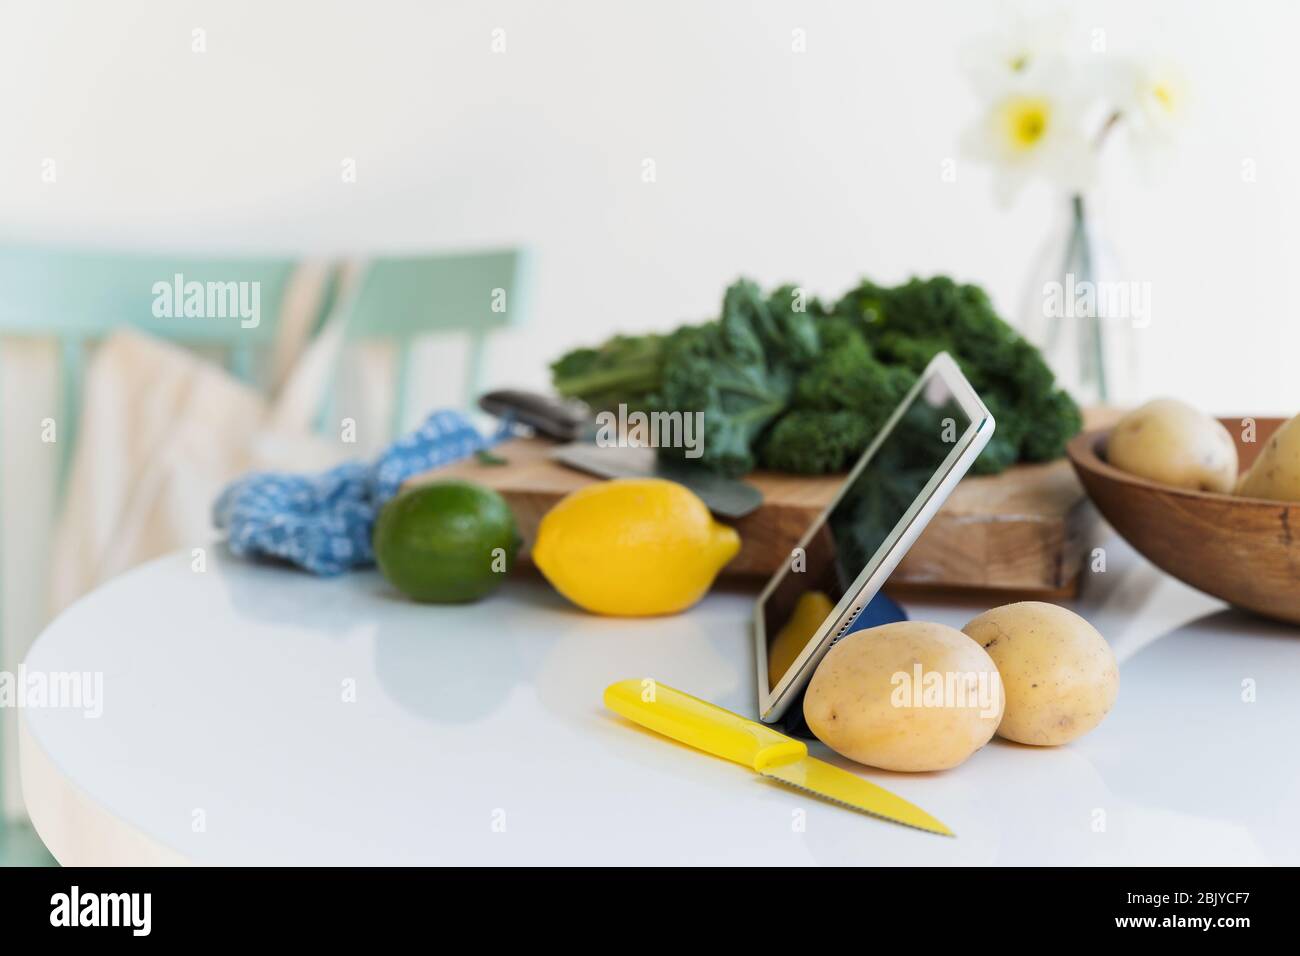 Tablet and vegetables on table Stock Photo